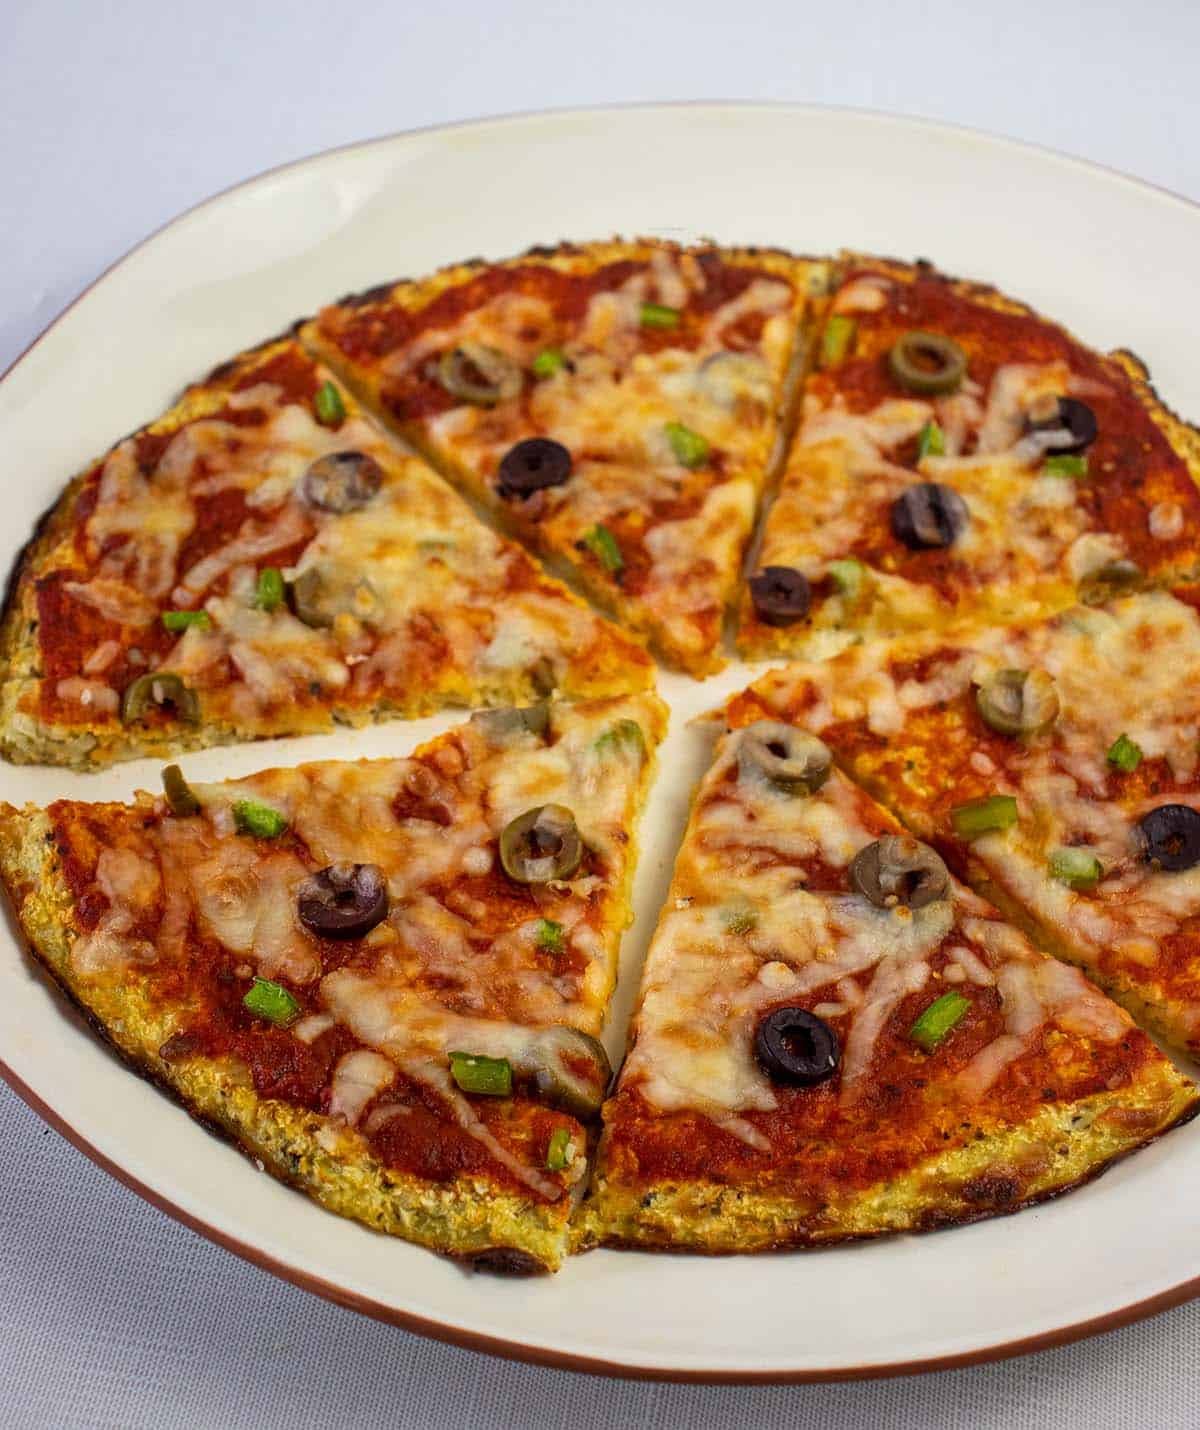 Cauliflower pizza crust topped with tomato sauce, olives, bell peppers and mozzarella cheese on a white plate with brown trim. Pizza is sliced in diagonal slices.